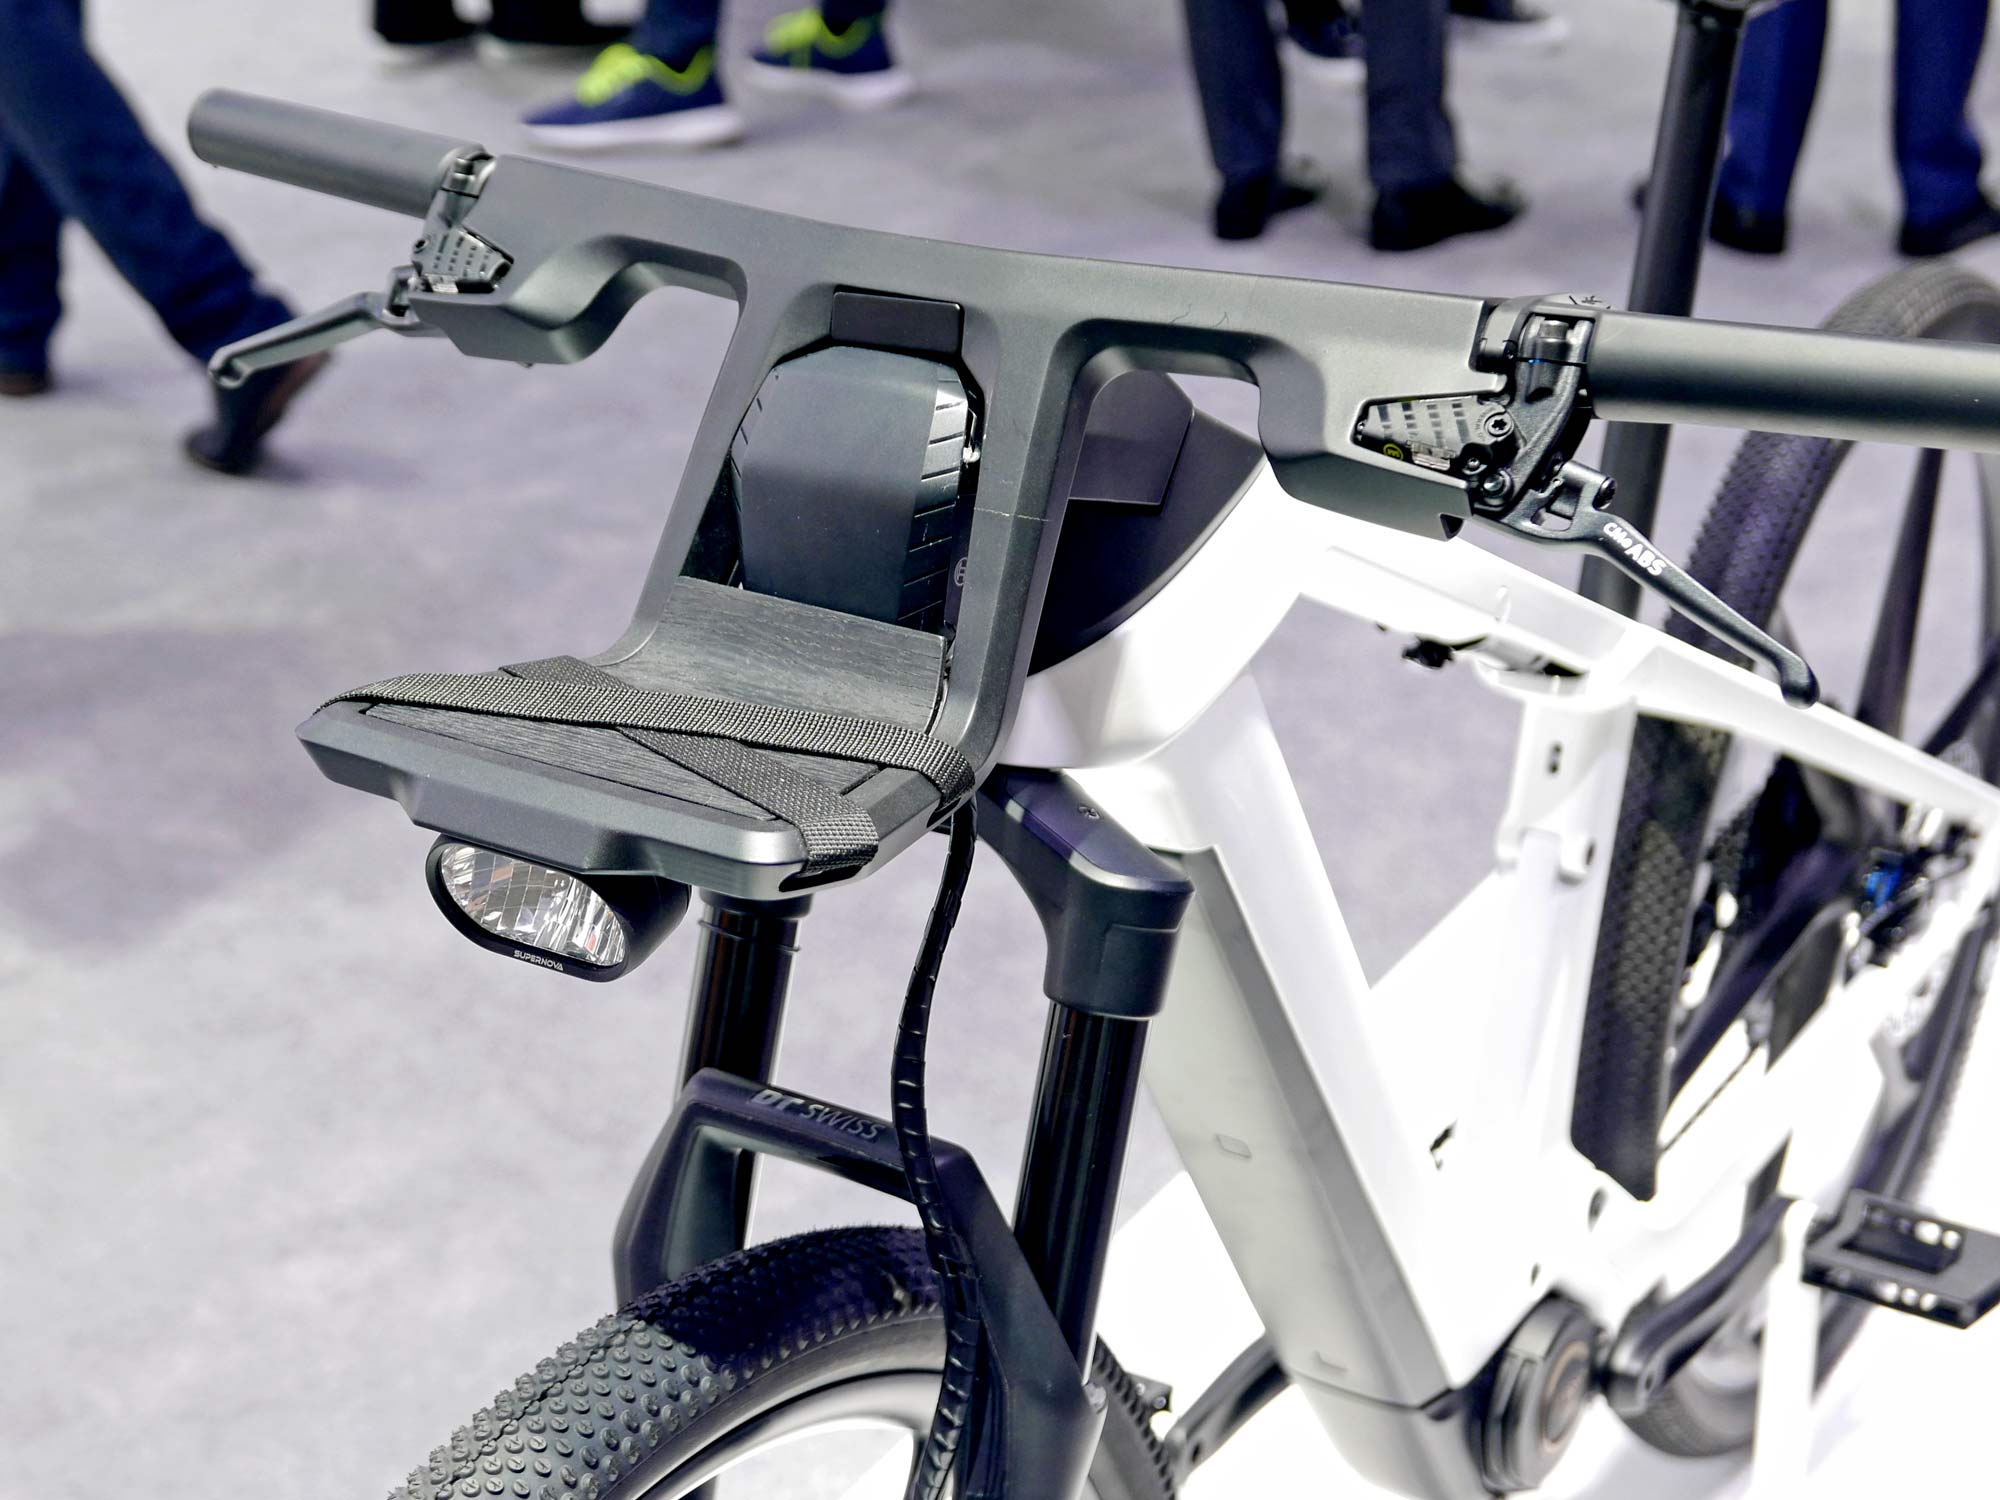 Bosch eBike ABS prototype e-bike with integrated anti-lock braking, carbon cockpit